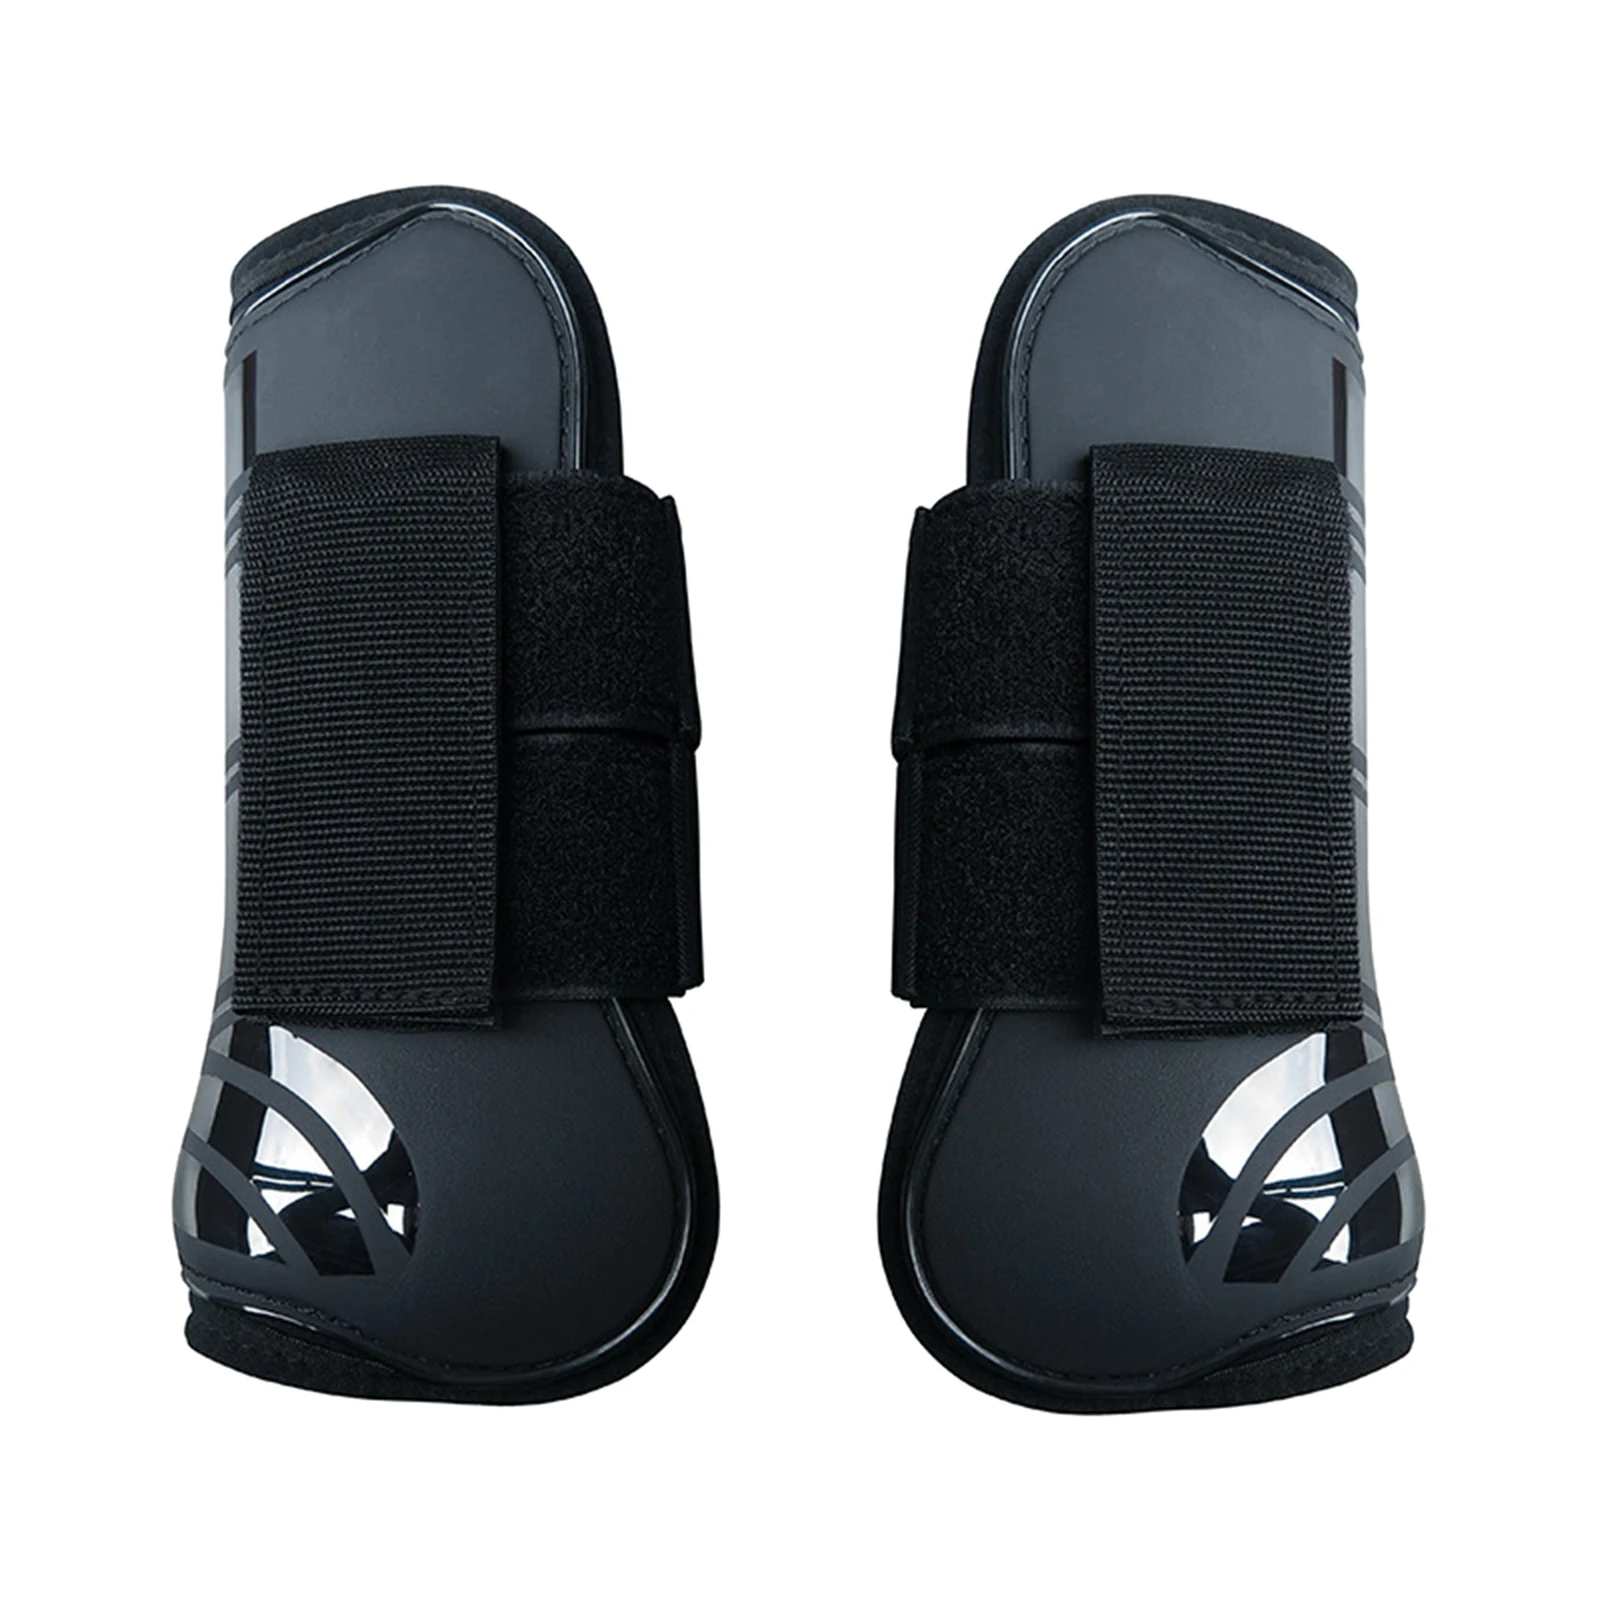 Horse Leg Boots Fetlock Boots Front Hind Leg Tendon Protect Equestrian, PU Shell and High-Quality Neoprene for Riding Training